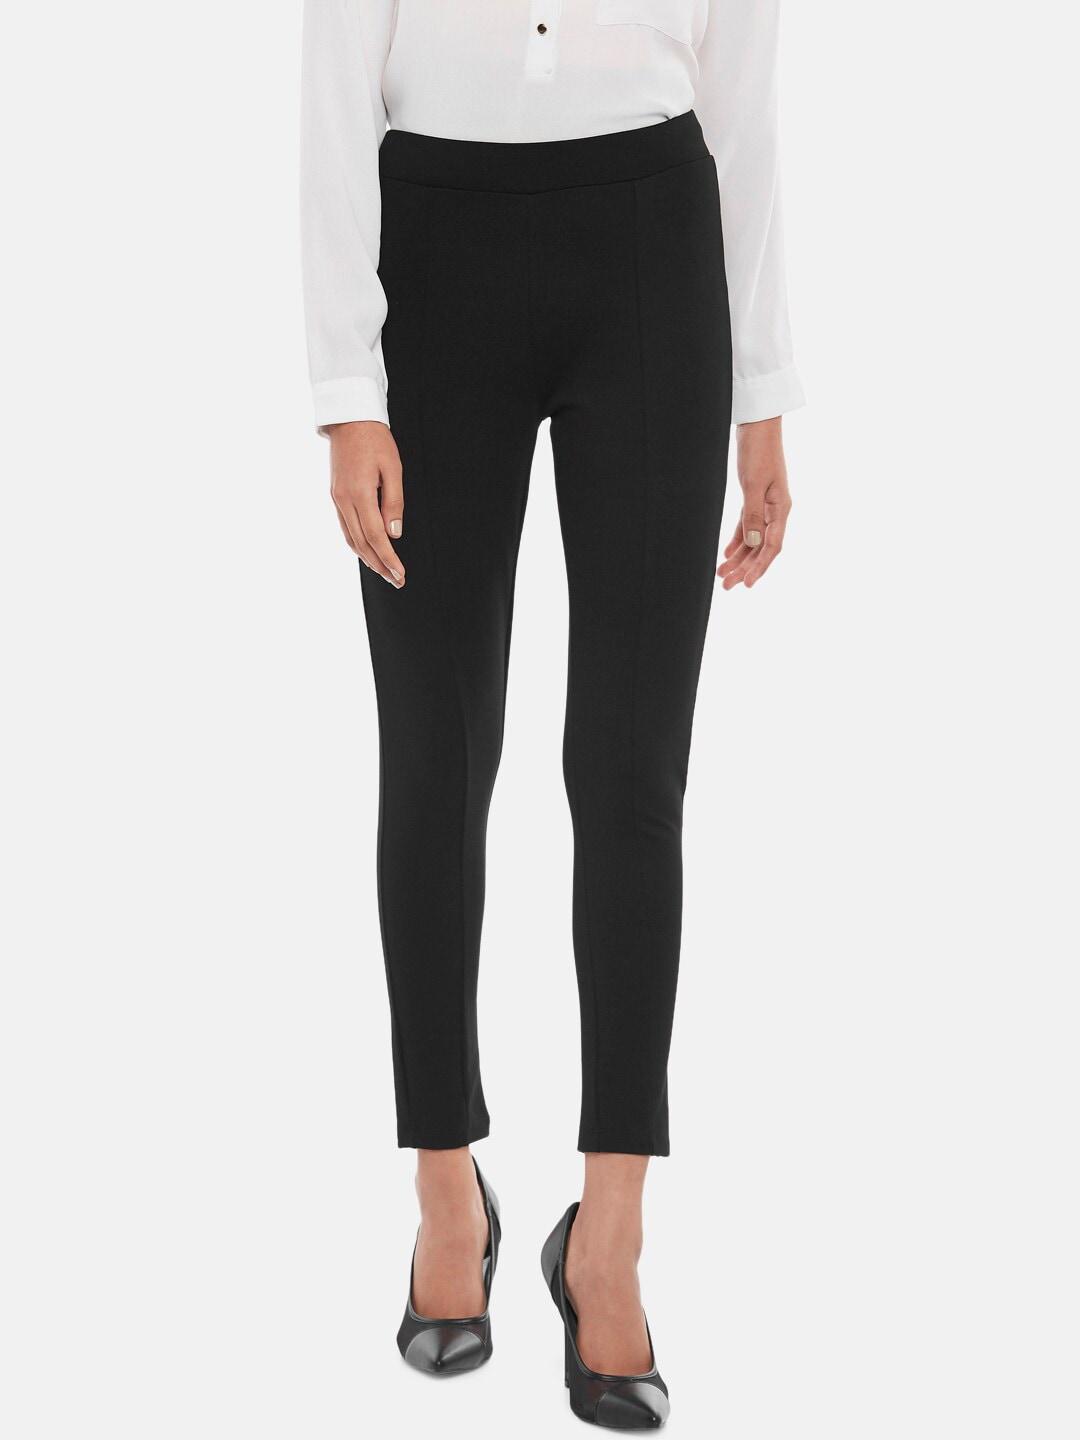 annabelle-by-pantaloons-women-black-solid-skinny-fit-treggings